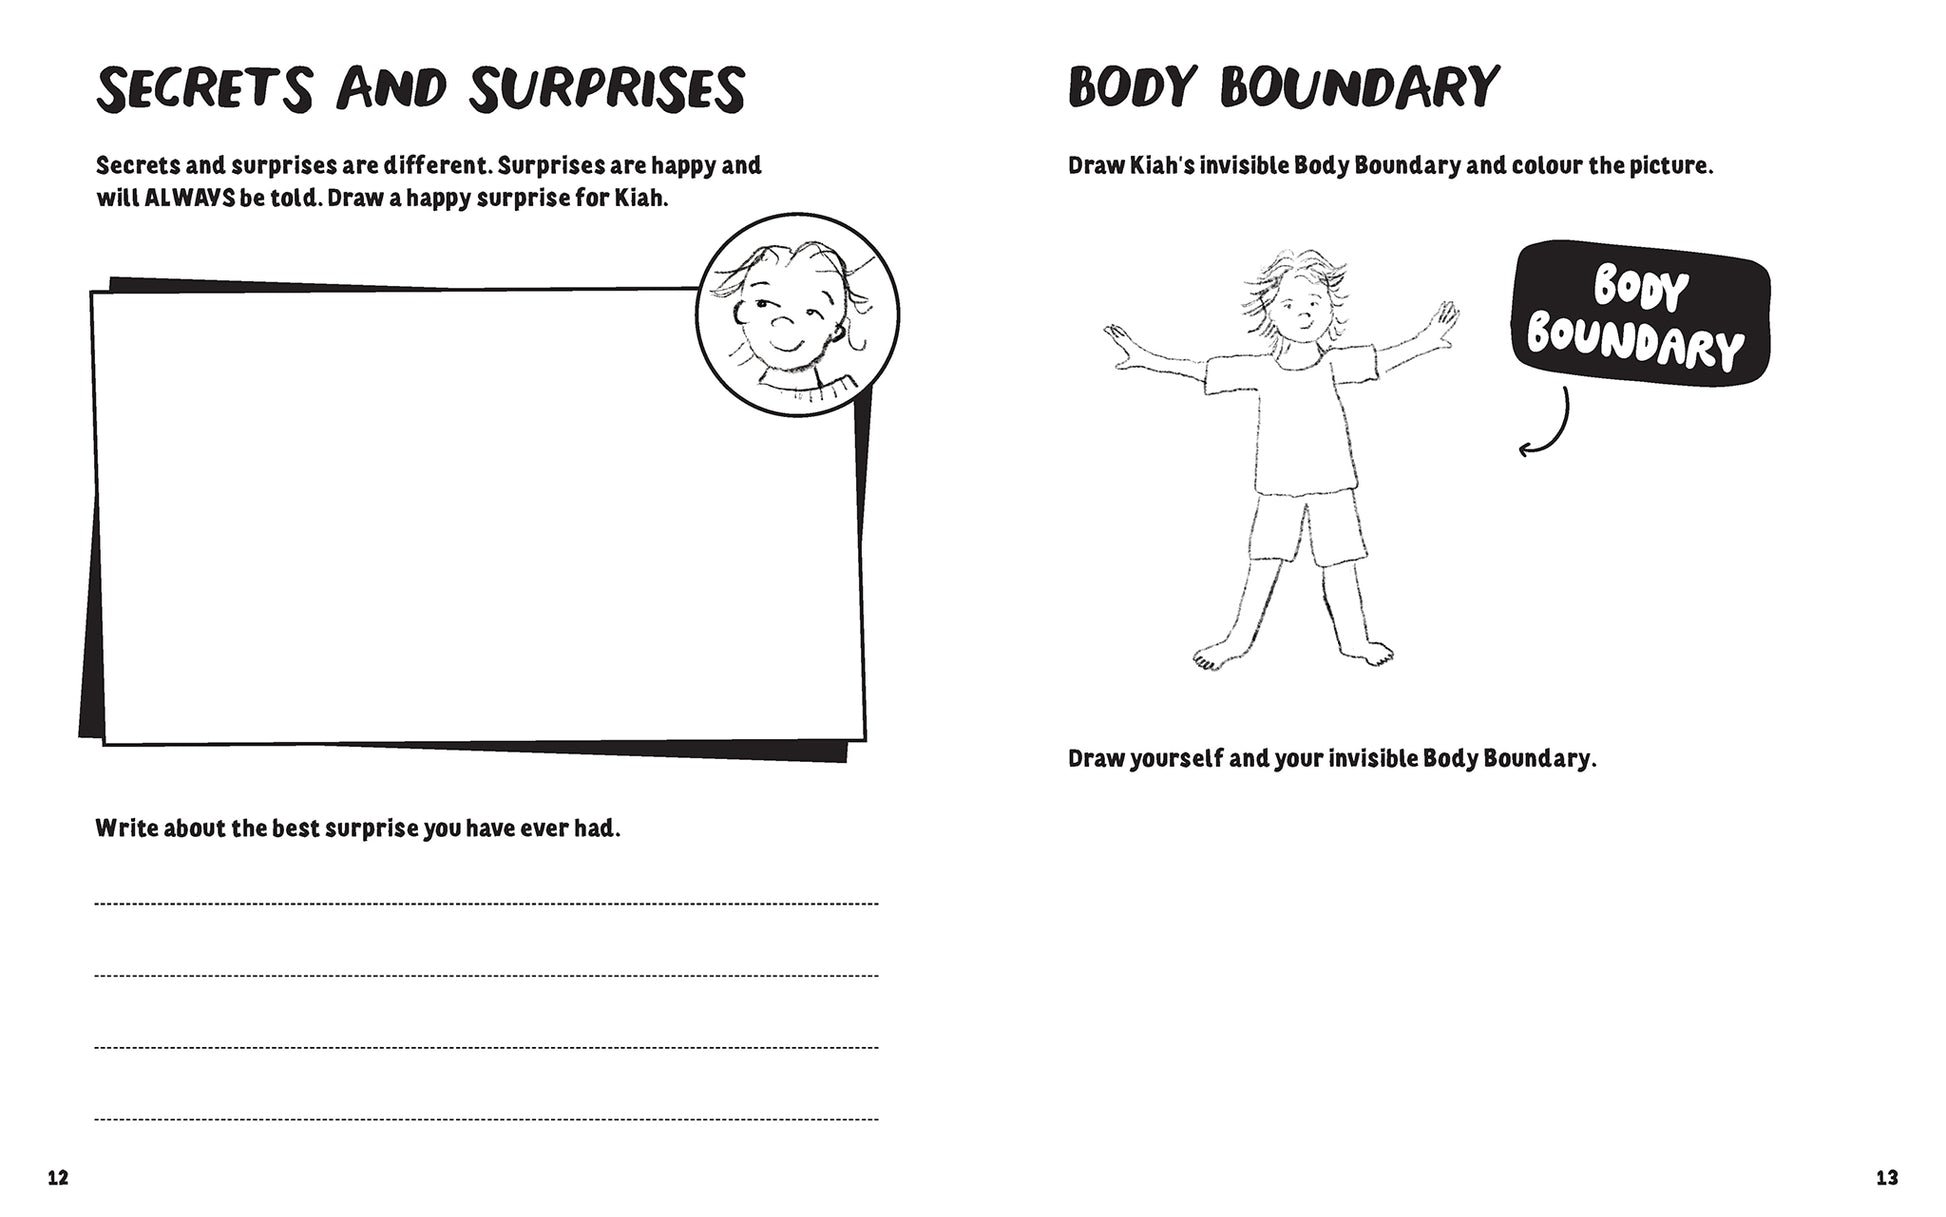 A page from the book 'My Body! what I Say Goes! Kiah's Edition. Activity Book.' by Jayneen Sanders